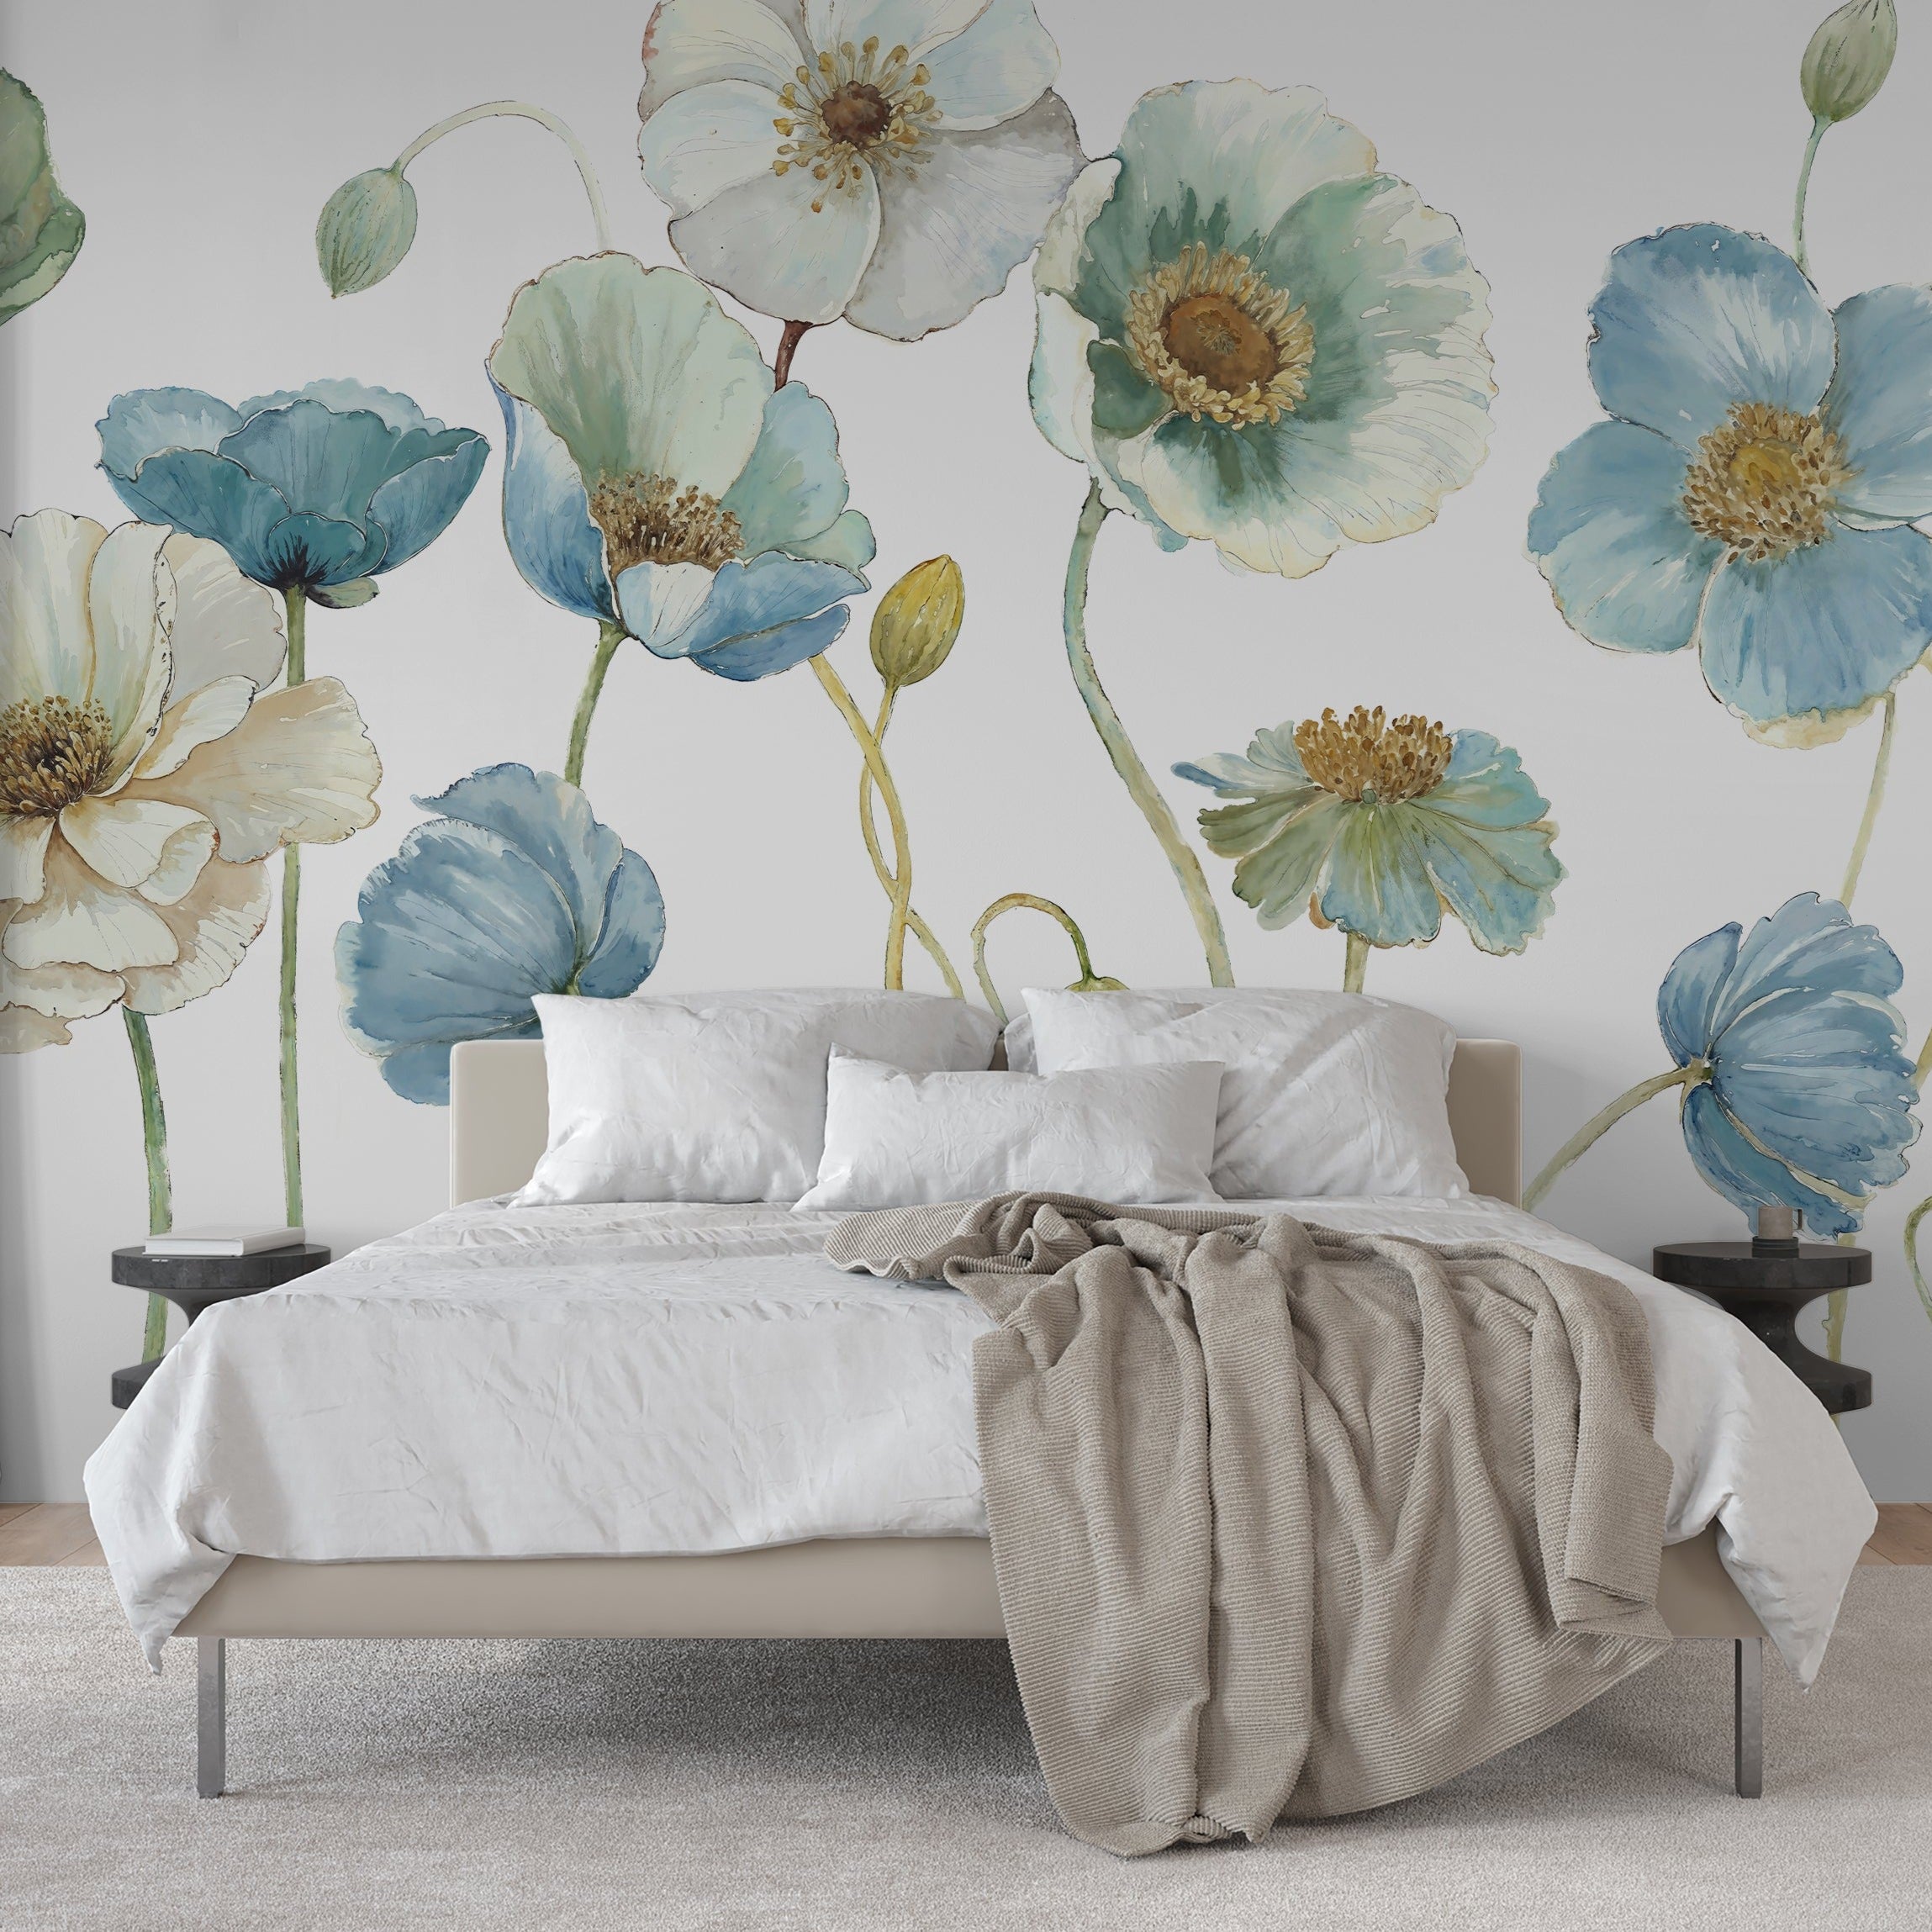 "Meadow Whispers (White) Wallpaper by Wall Blush in a cozy bedroom, featuring large floral design as the focal point."